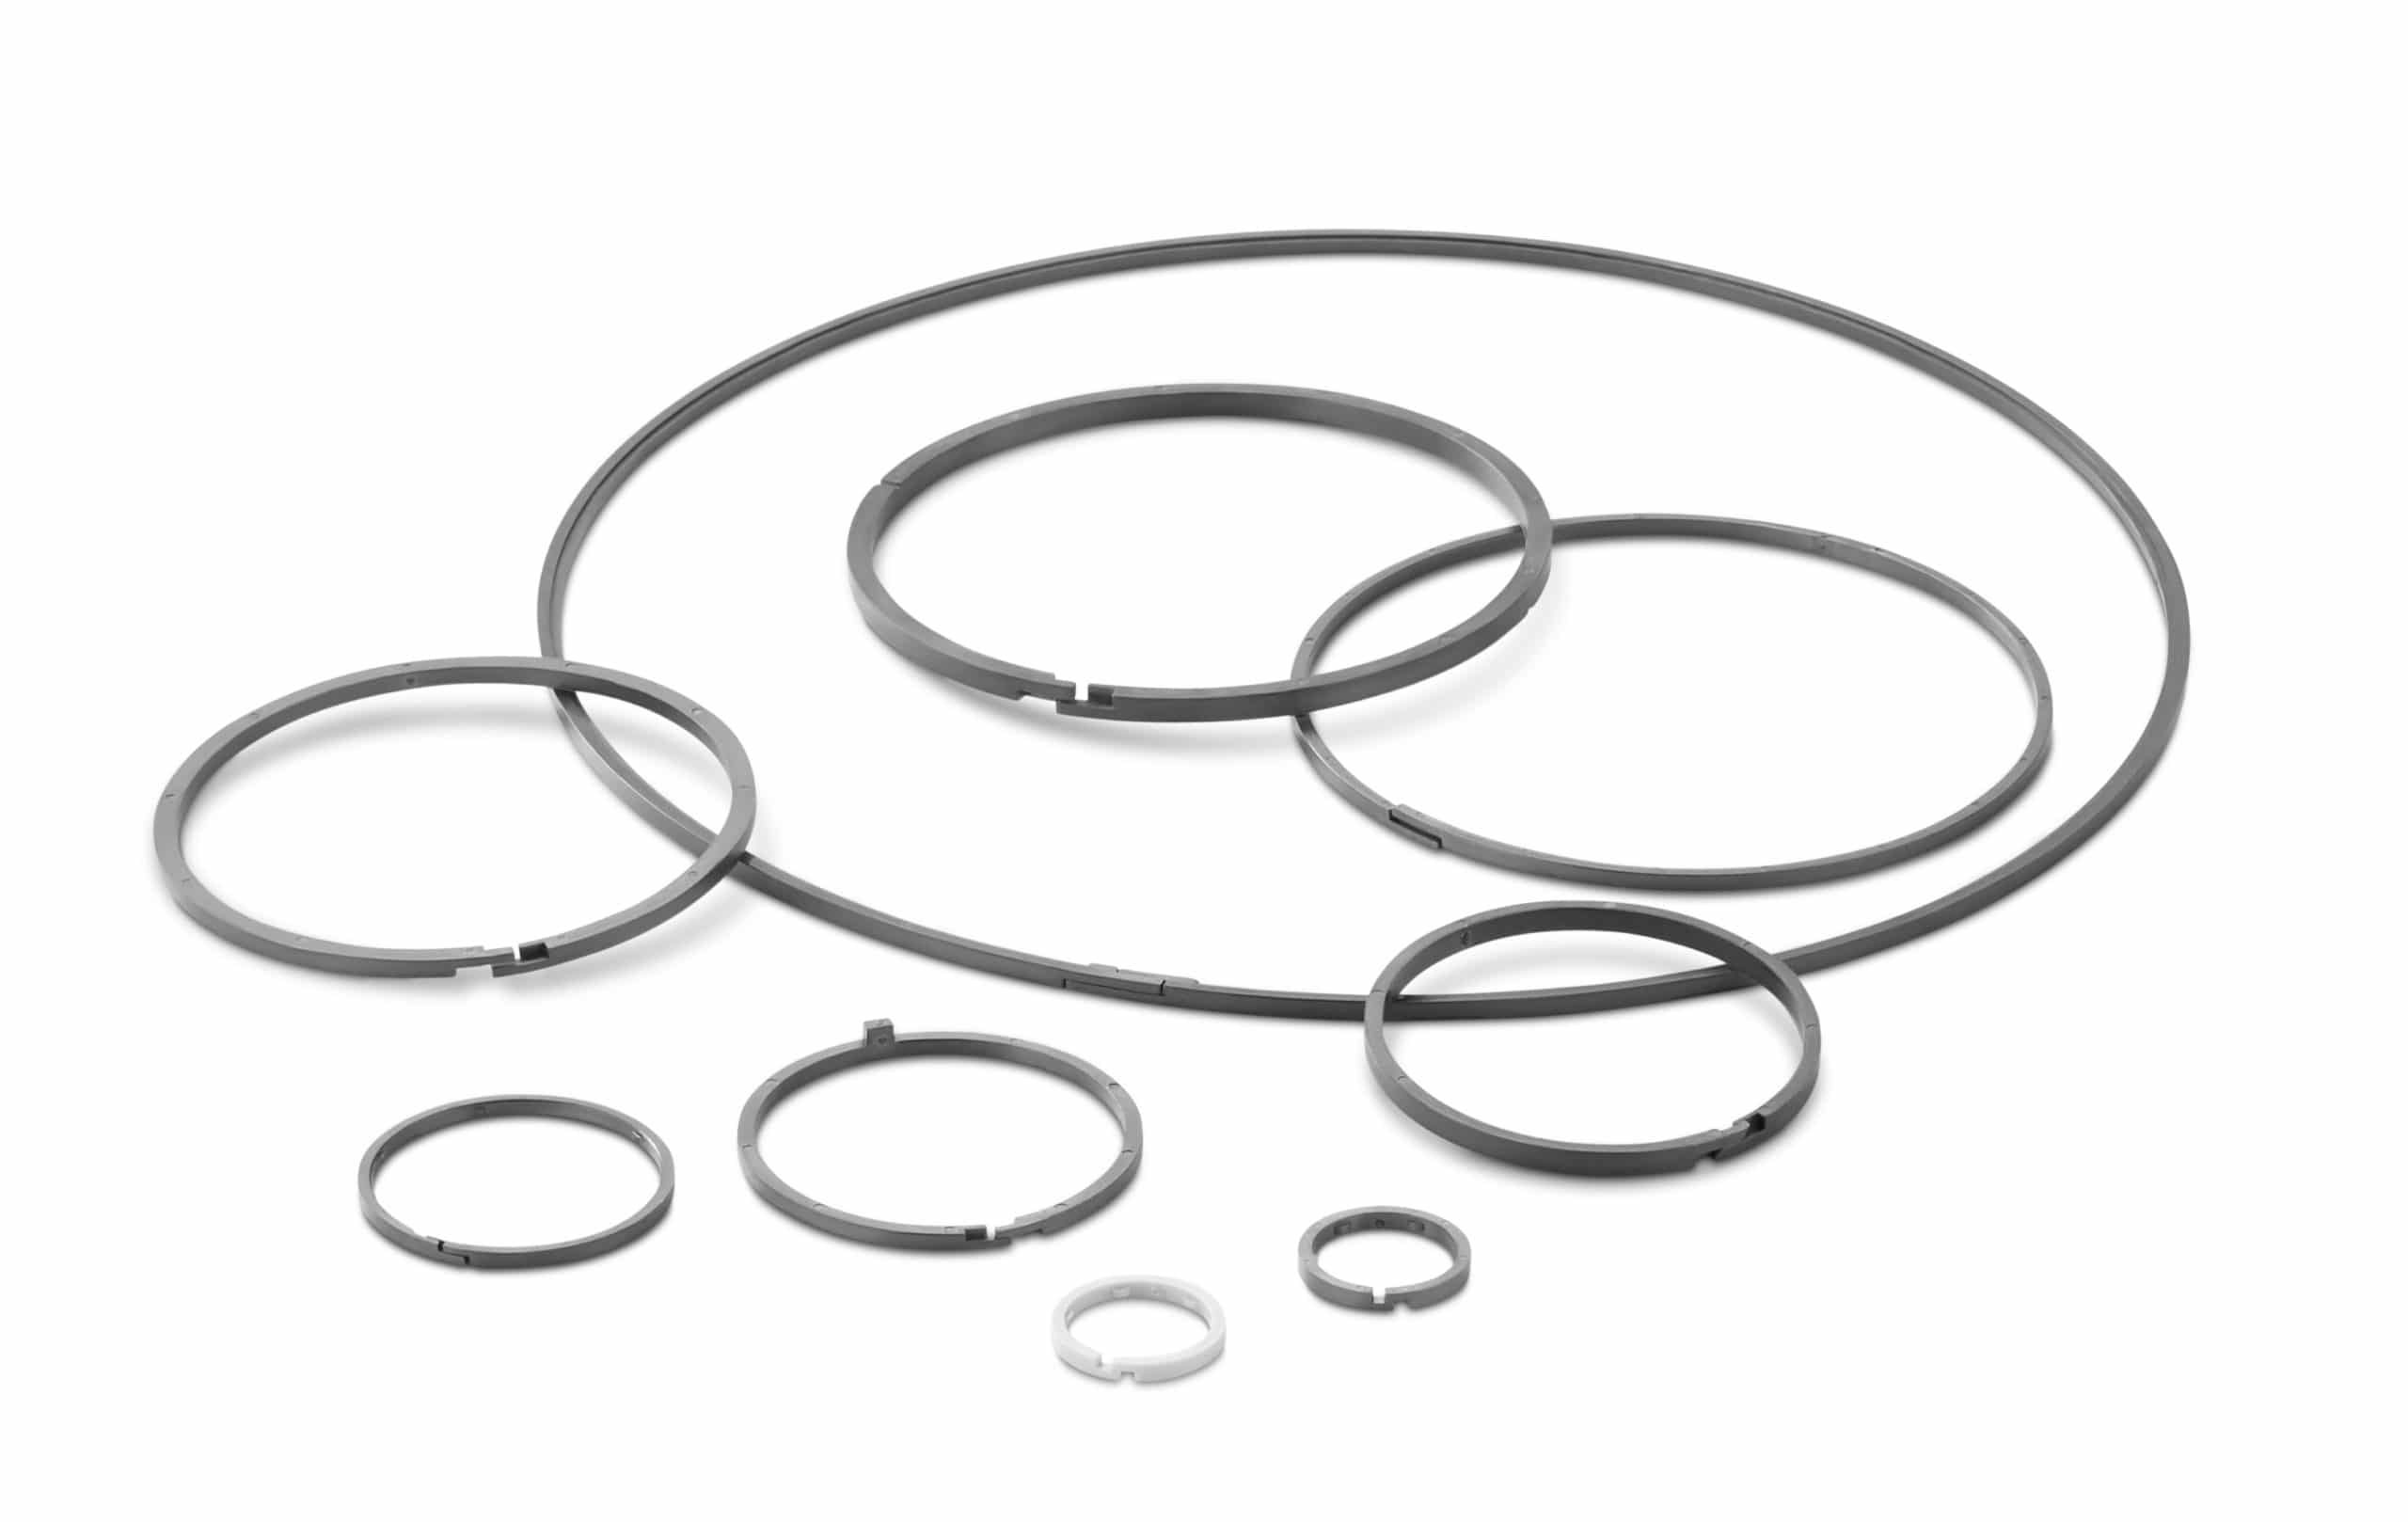 http://www.mnrubber.com/wp-content/uploads/2022/02/Seal-Rings-Group-scaled.jpg